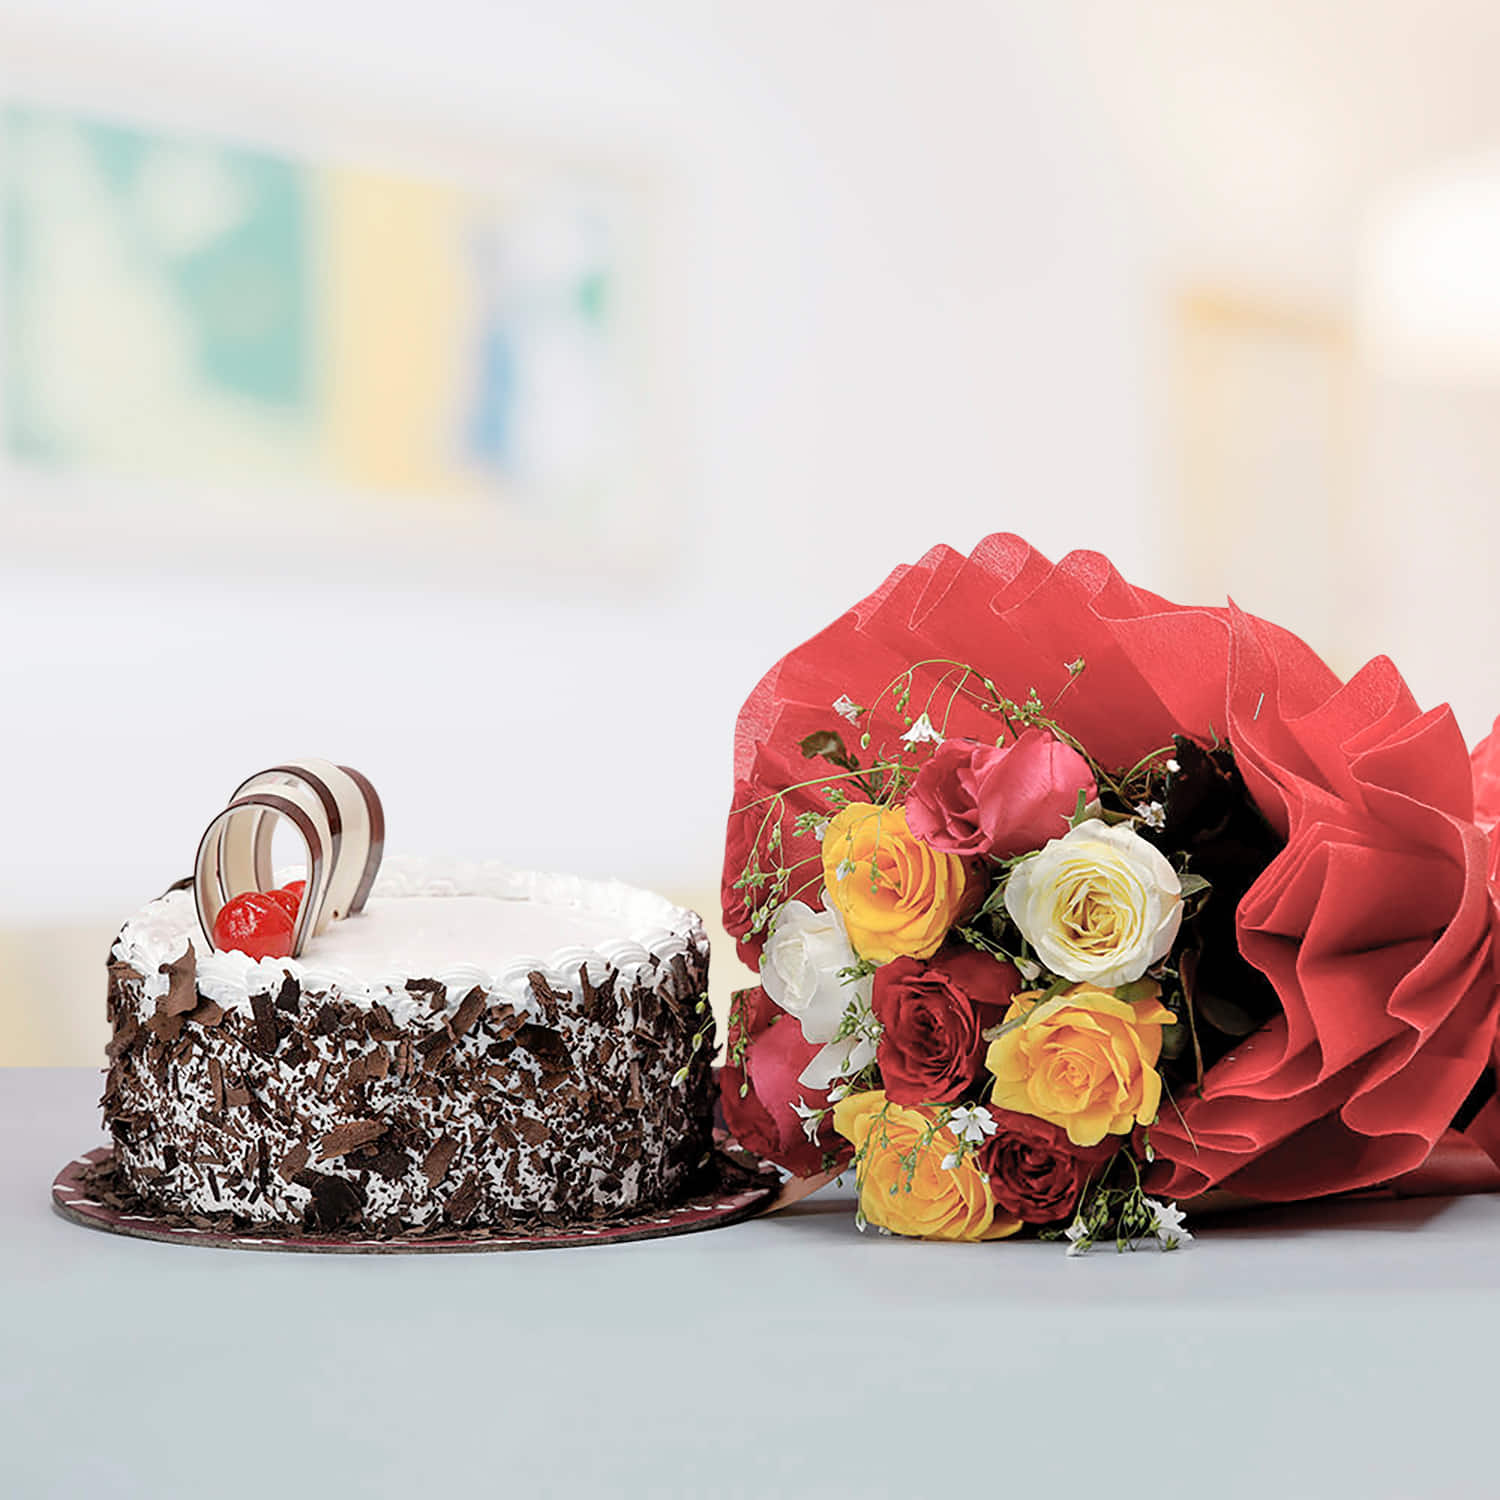 Avail Midnight Cake Delivery in Noida at CakenFlower  Best Cake Shop in  Noida